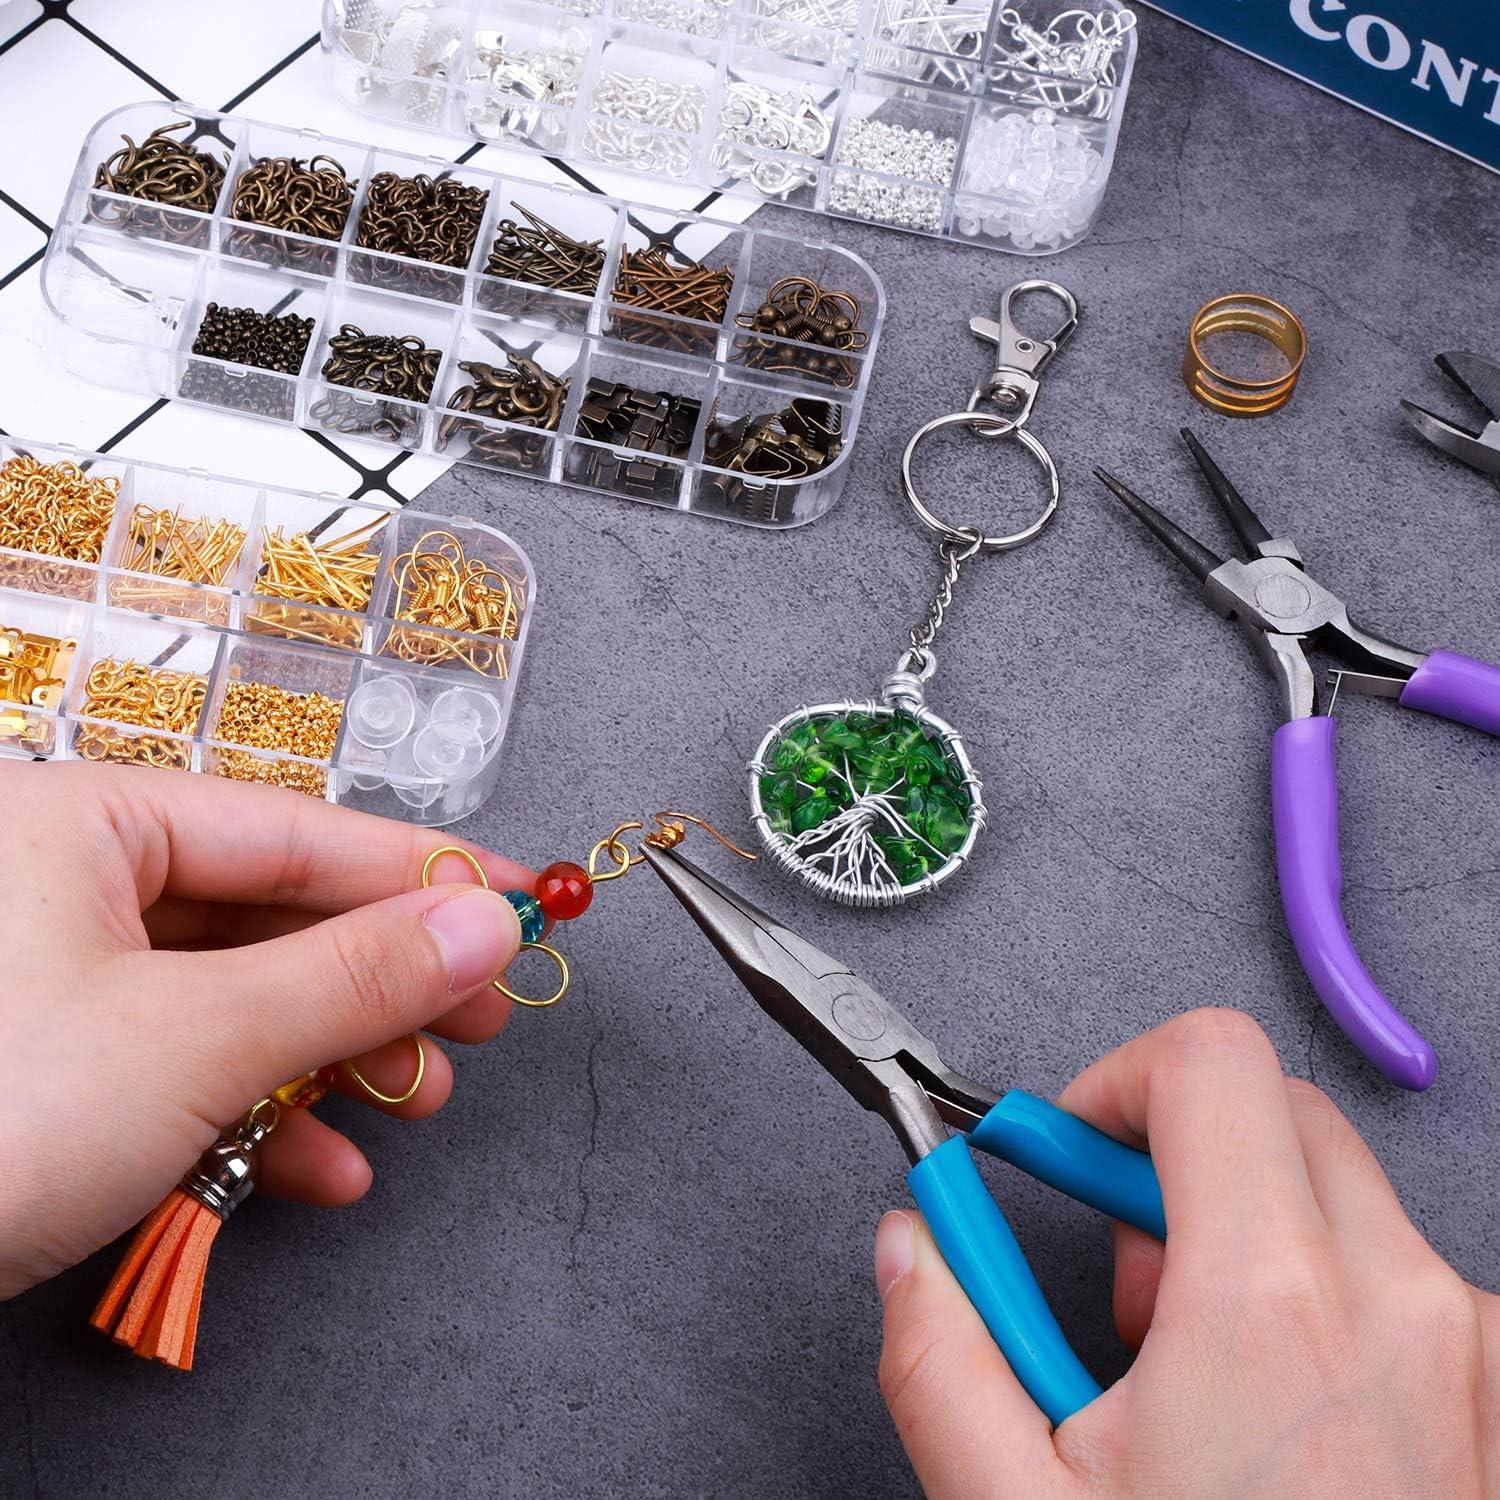 PAXCOO Jewelry Making Supplies Kit with Jewelry Tools, Jewelry Wires and  Jewelry Findings for Jewelry Repair and Beading